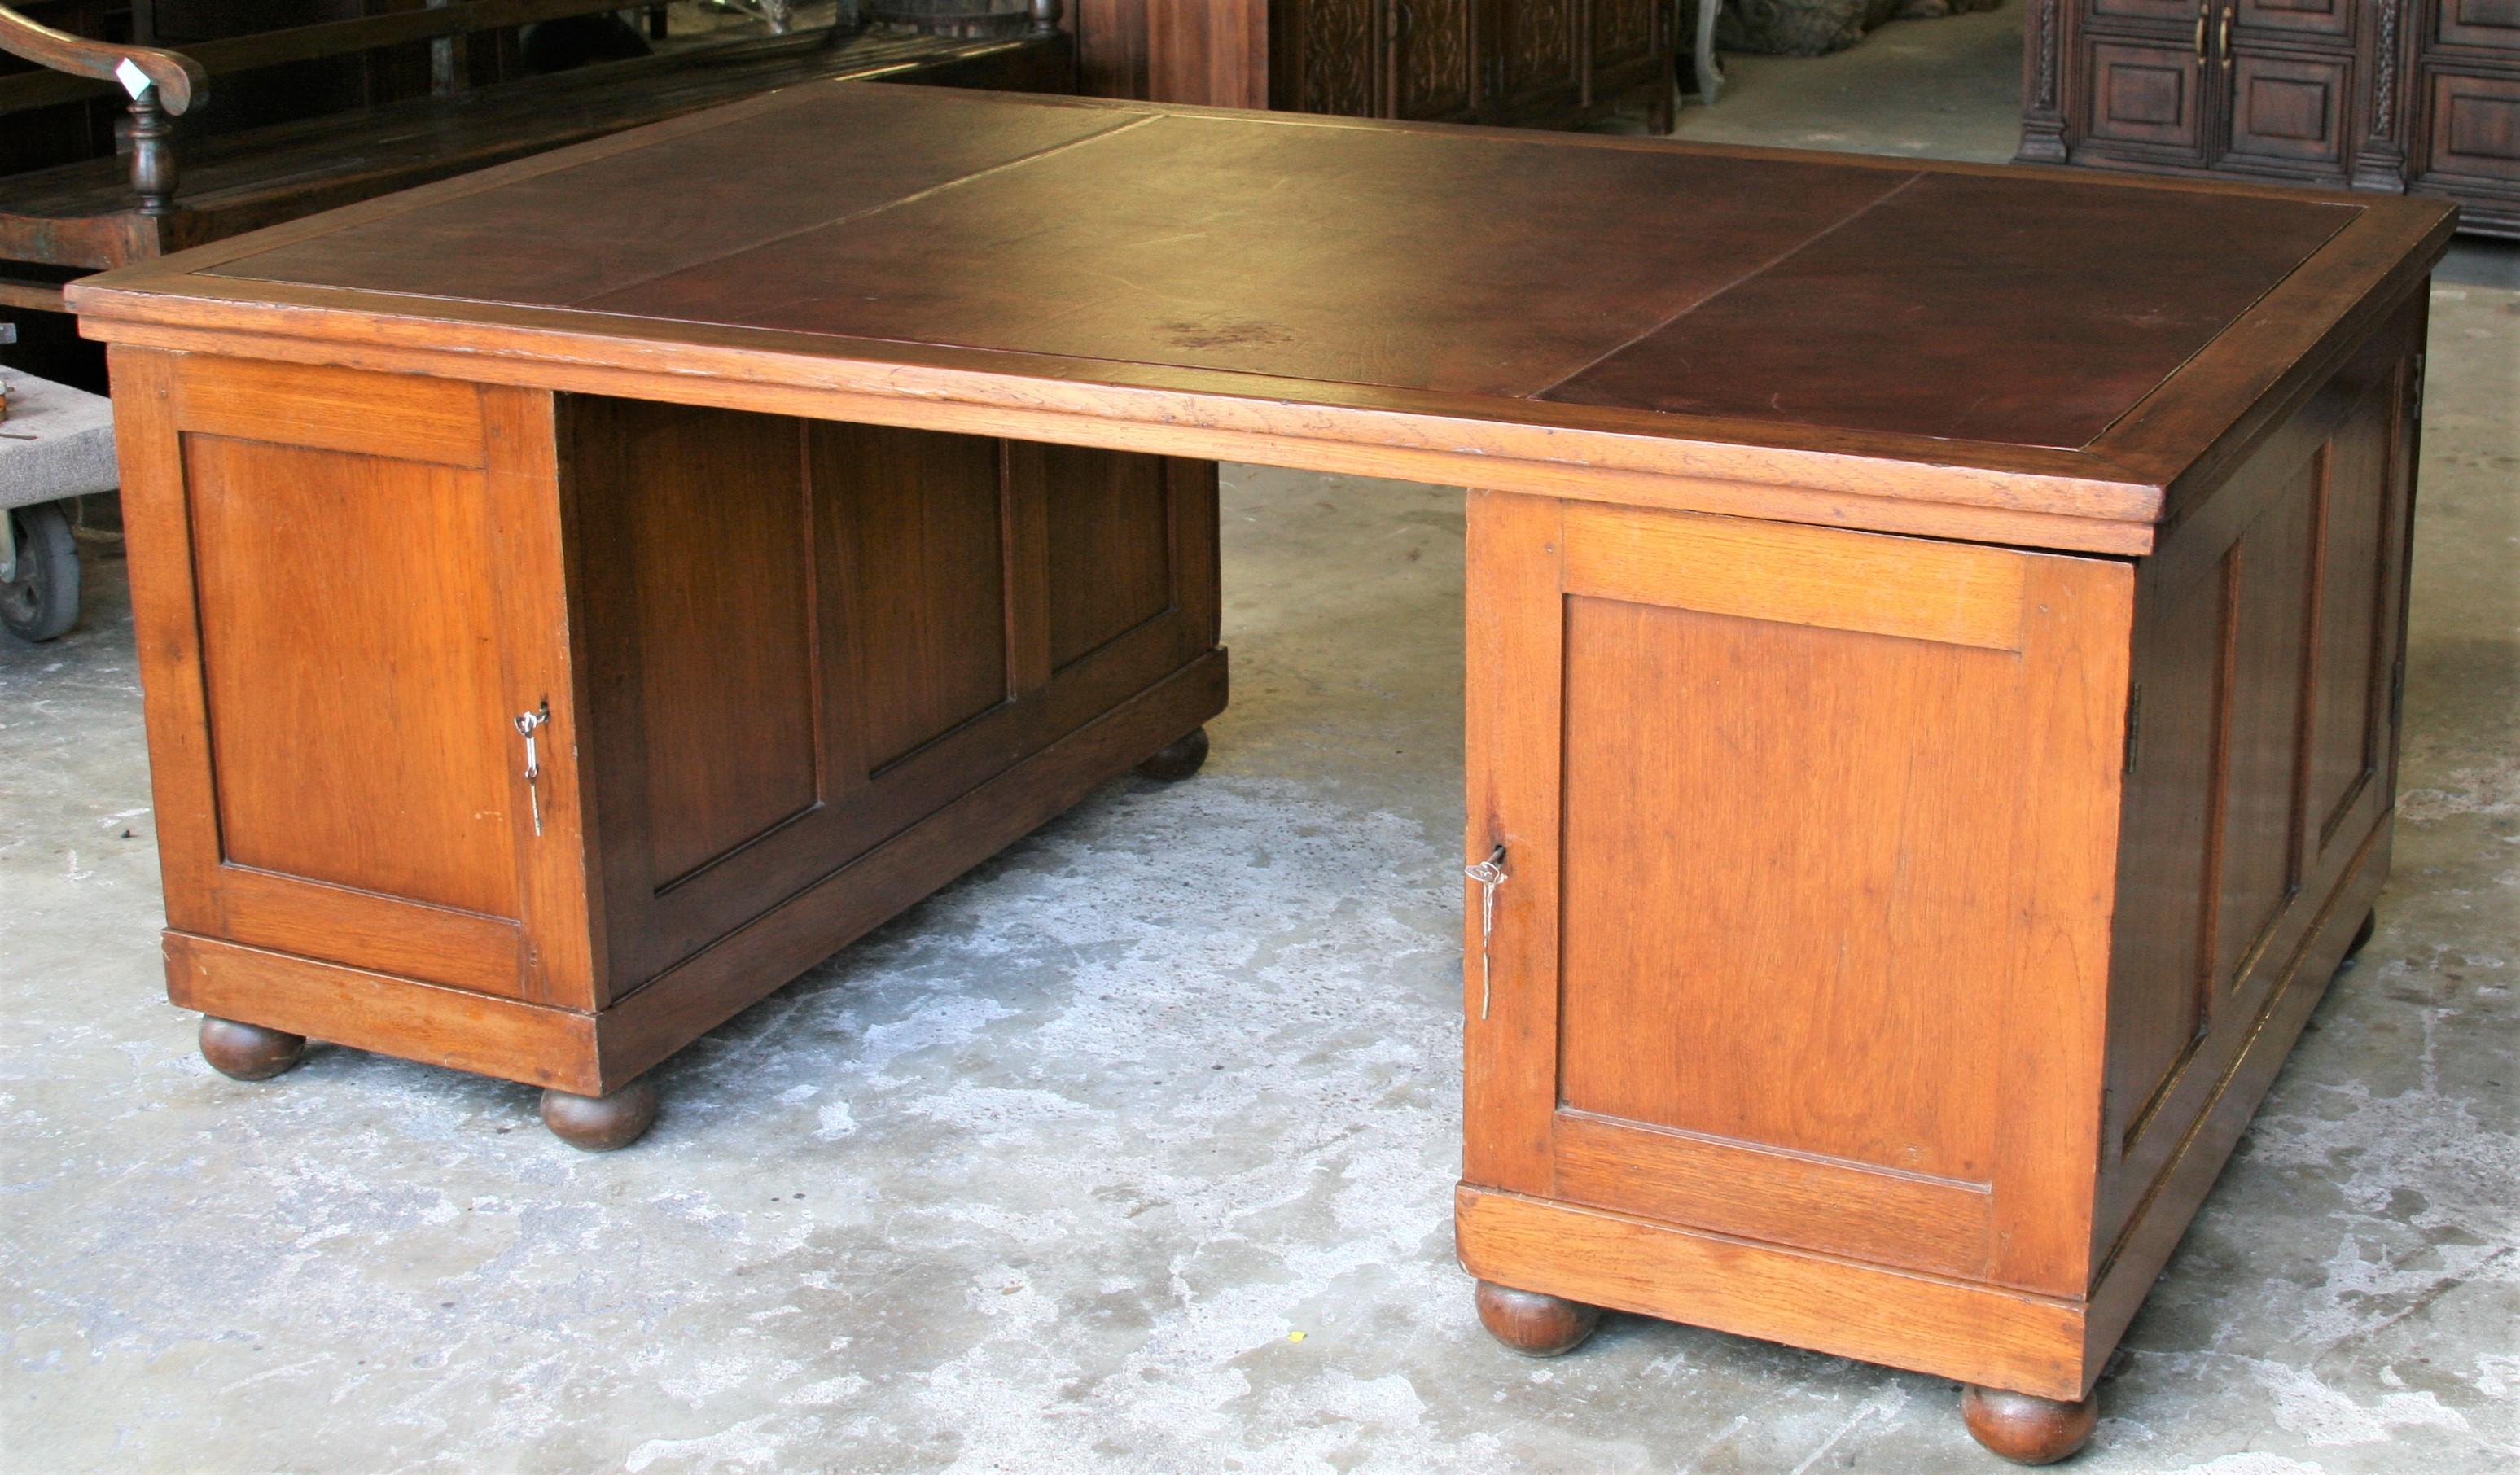 This piece of furniture was first conceived in the United Kingdom to accommodate the work of banking partners. This is a beautifully conceived and made desk for a senior personnel in the bank. The desk consists of three parts the top and two